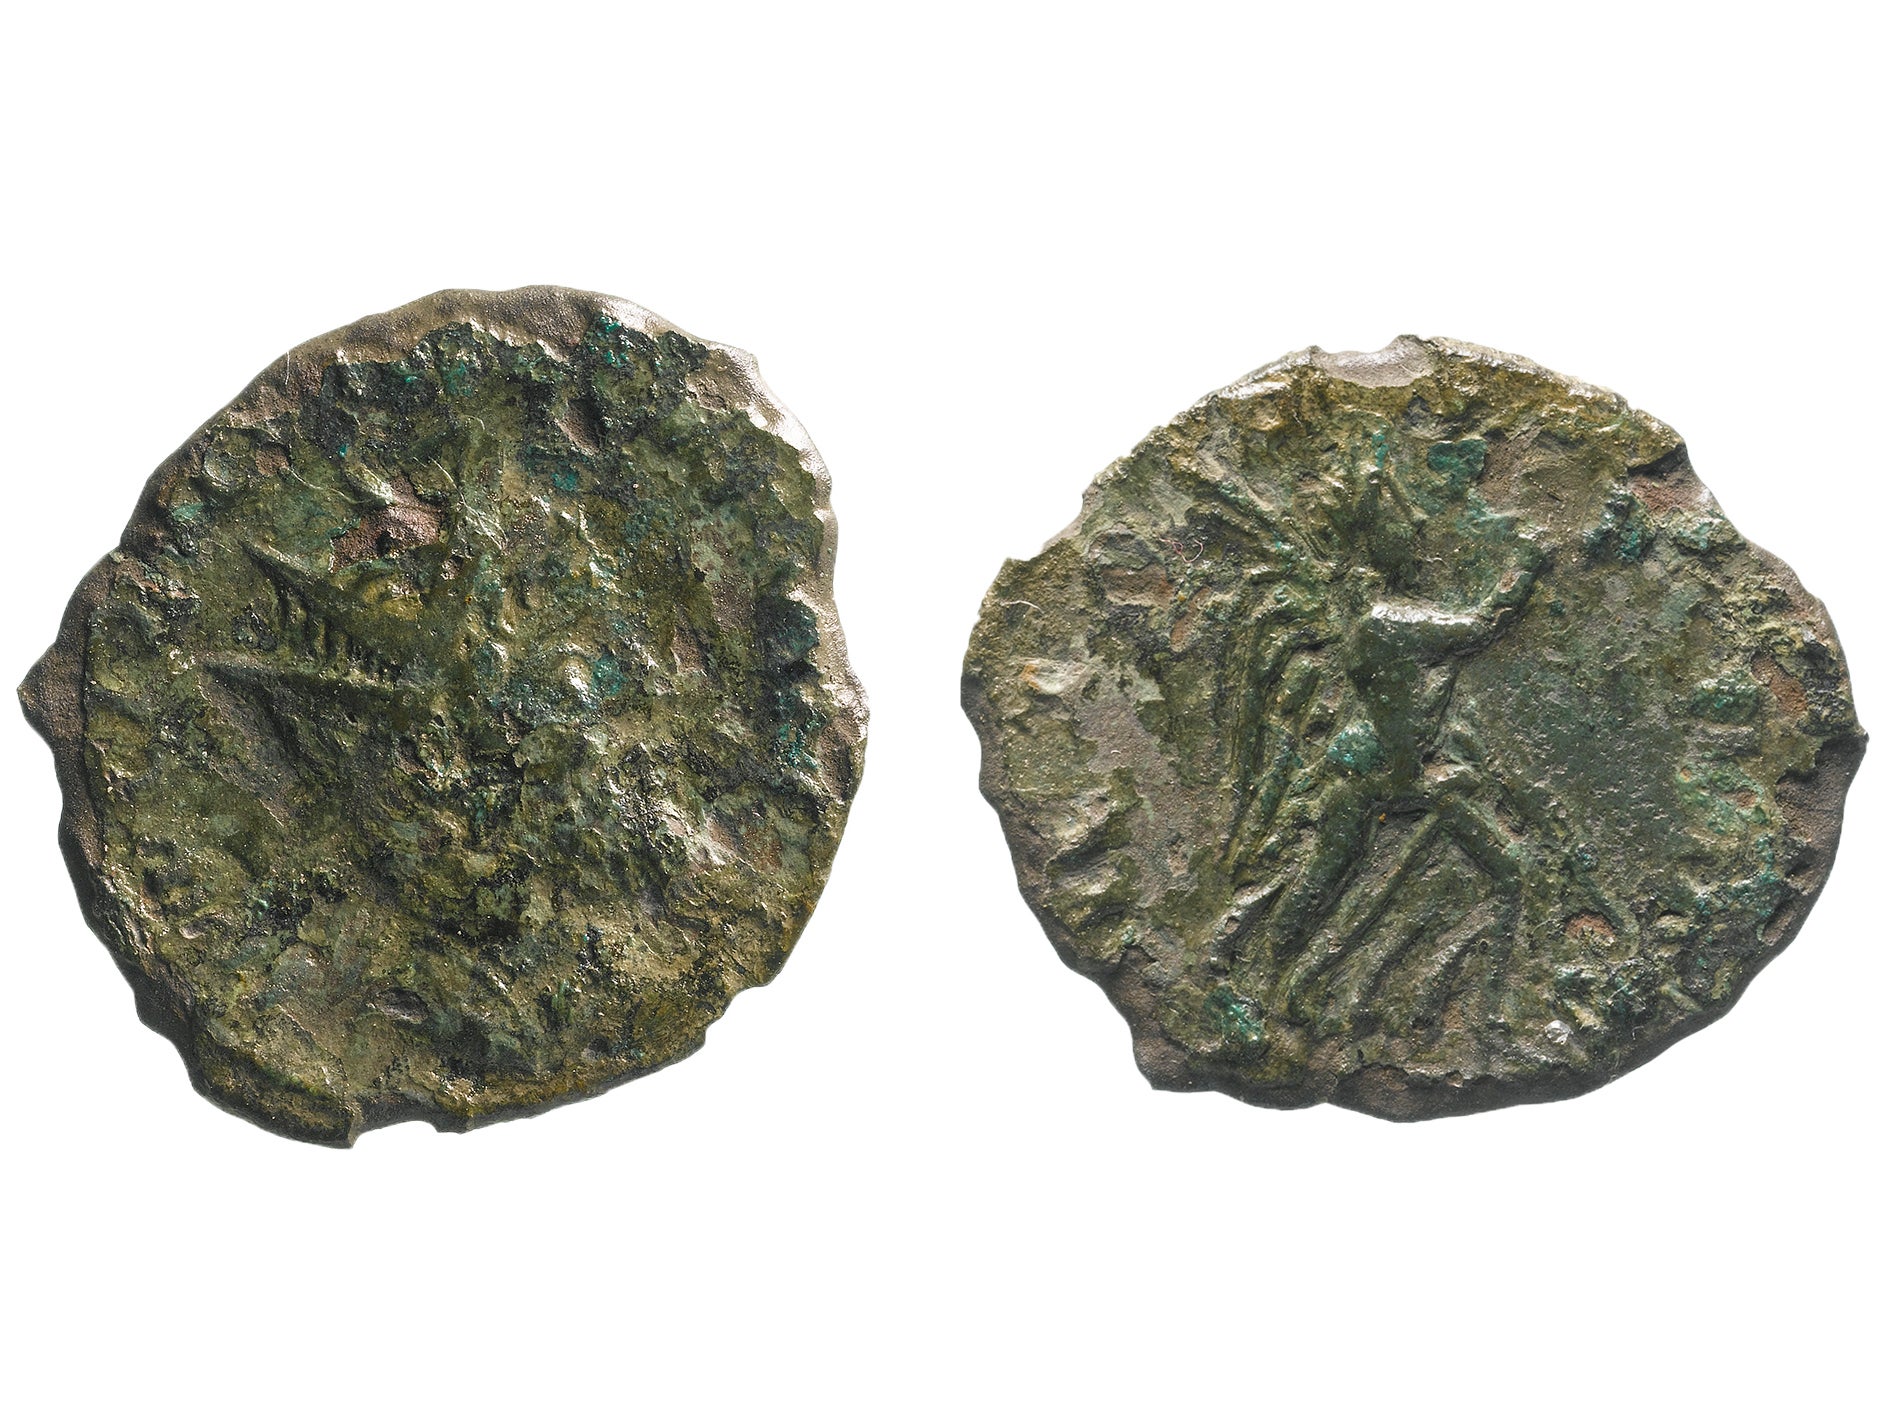 The coin is only the second of its kind to be found in England